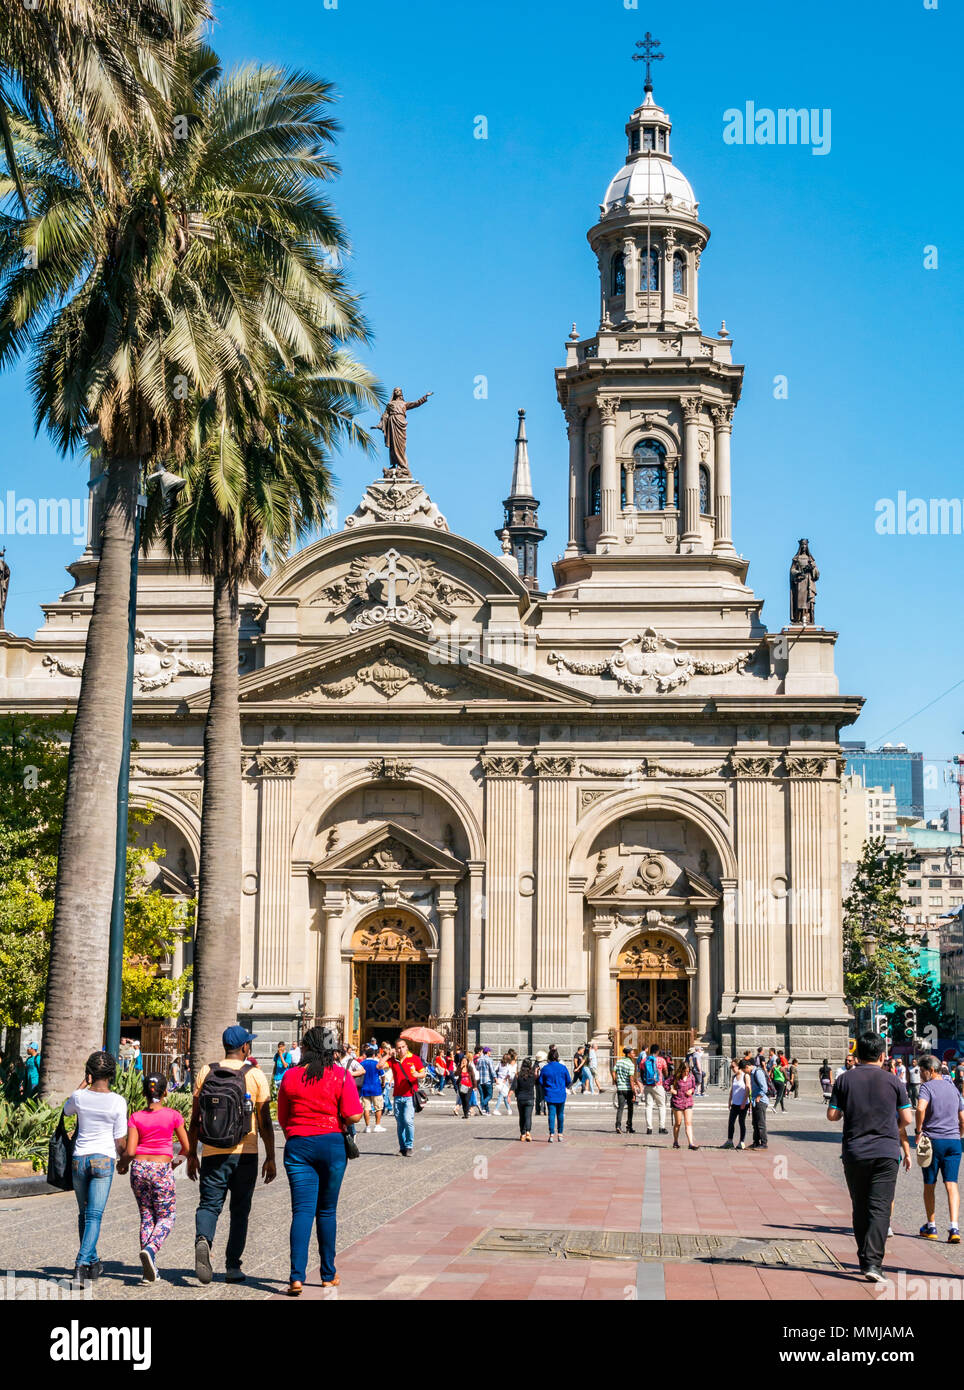 People walking in front of Metropolitan Cathedral, Plaza de Armas, Santiago, Chile, South America Stock Photo